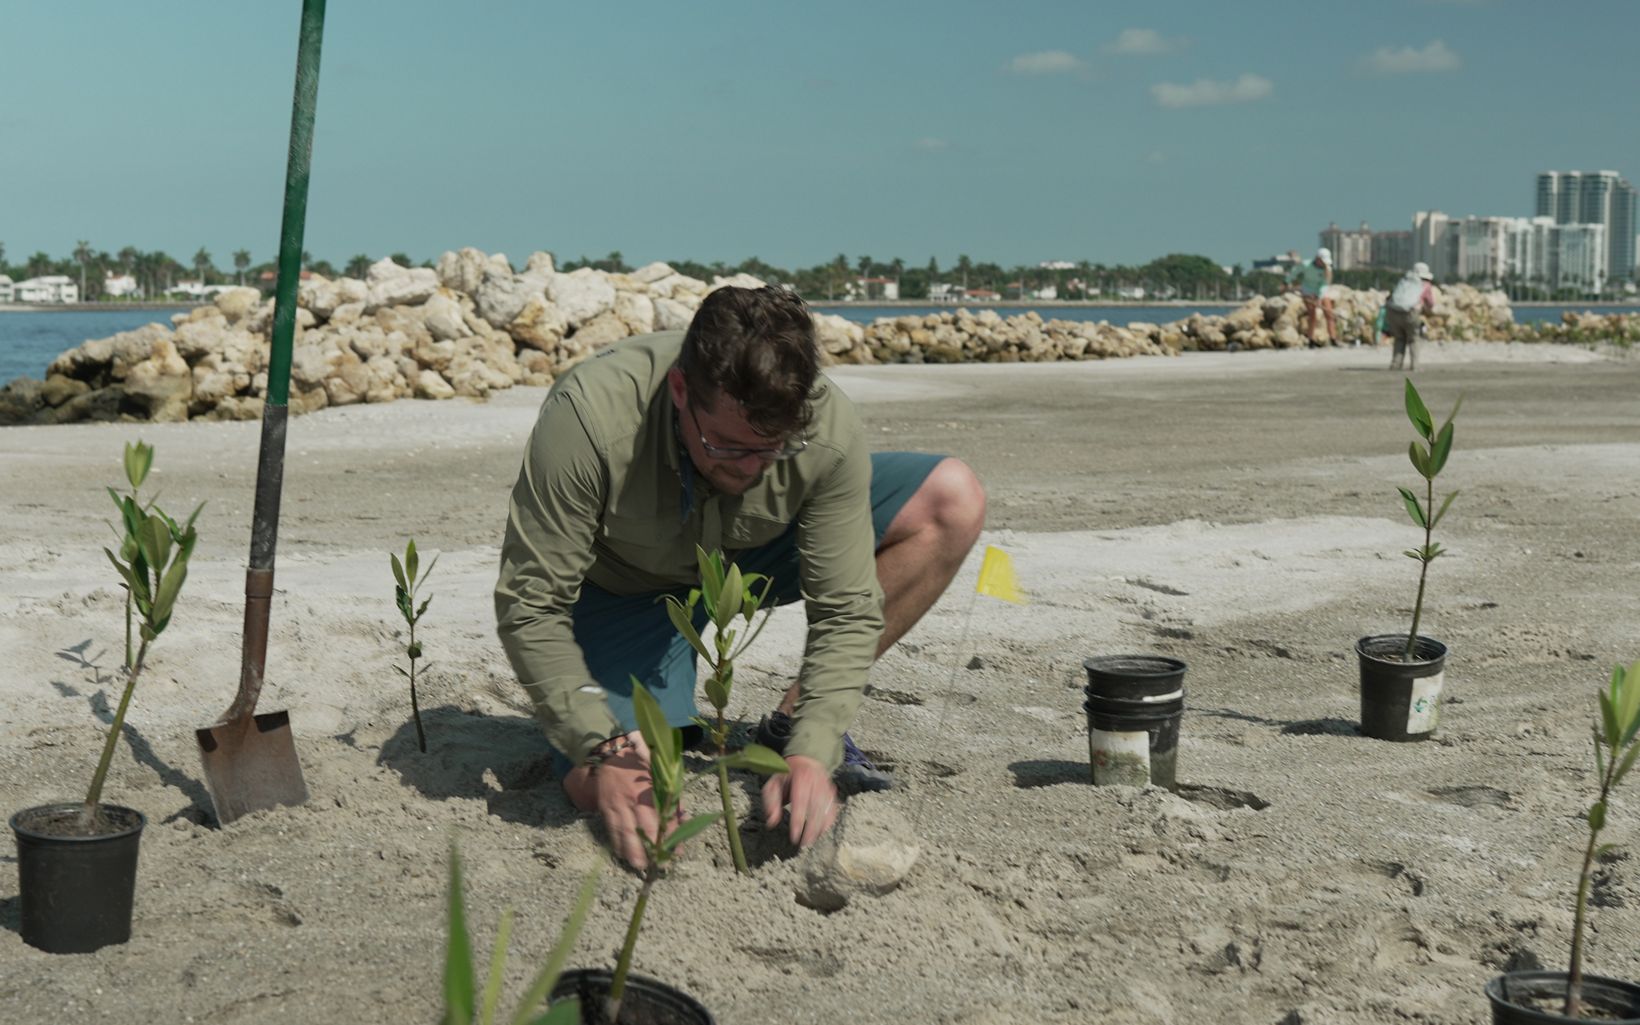 Mangrove Planting Mangroves were planted at the Palm Beach Resilient Island to improve coastal resilience. © Michael Landsberg